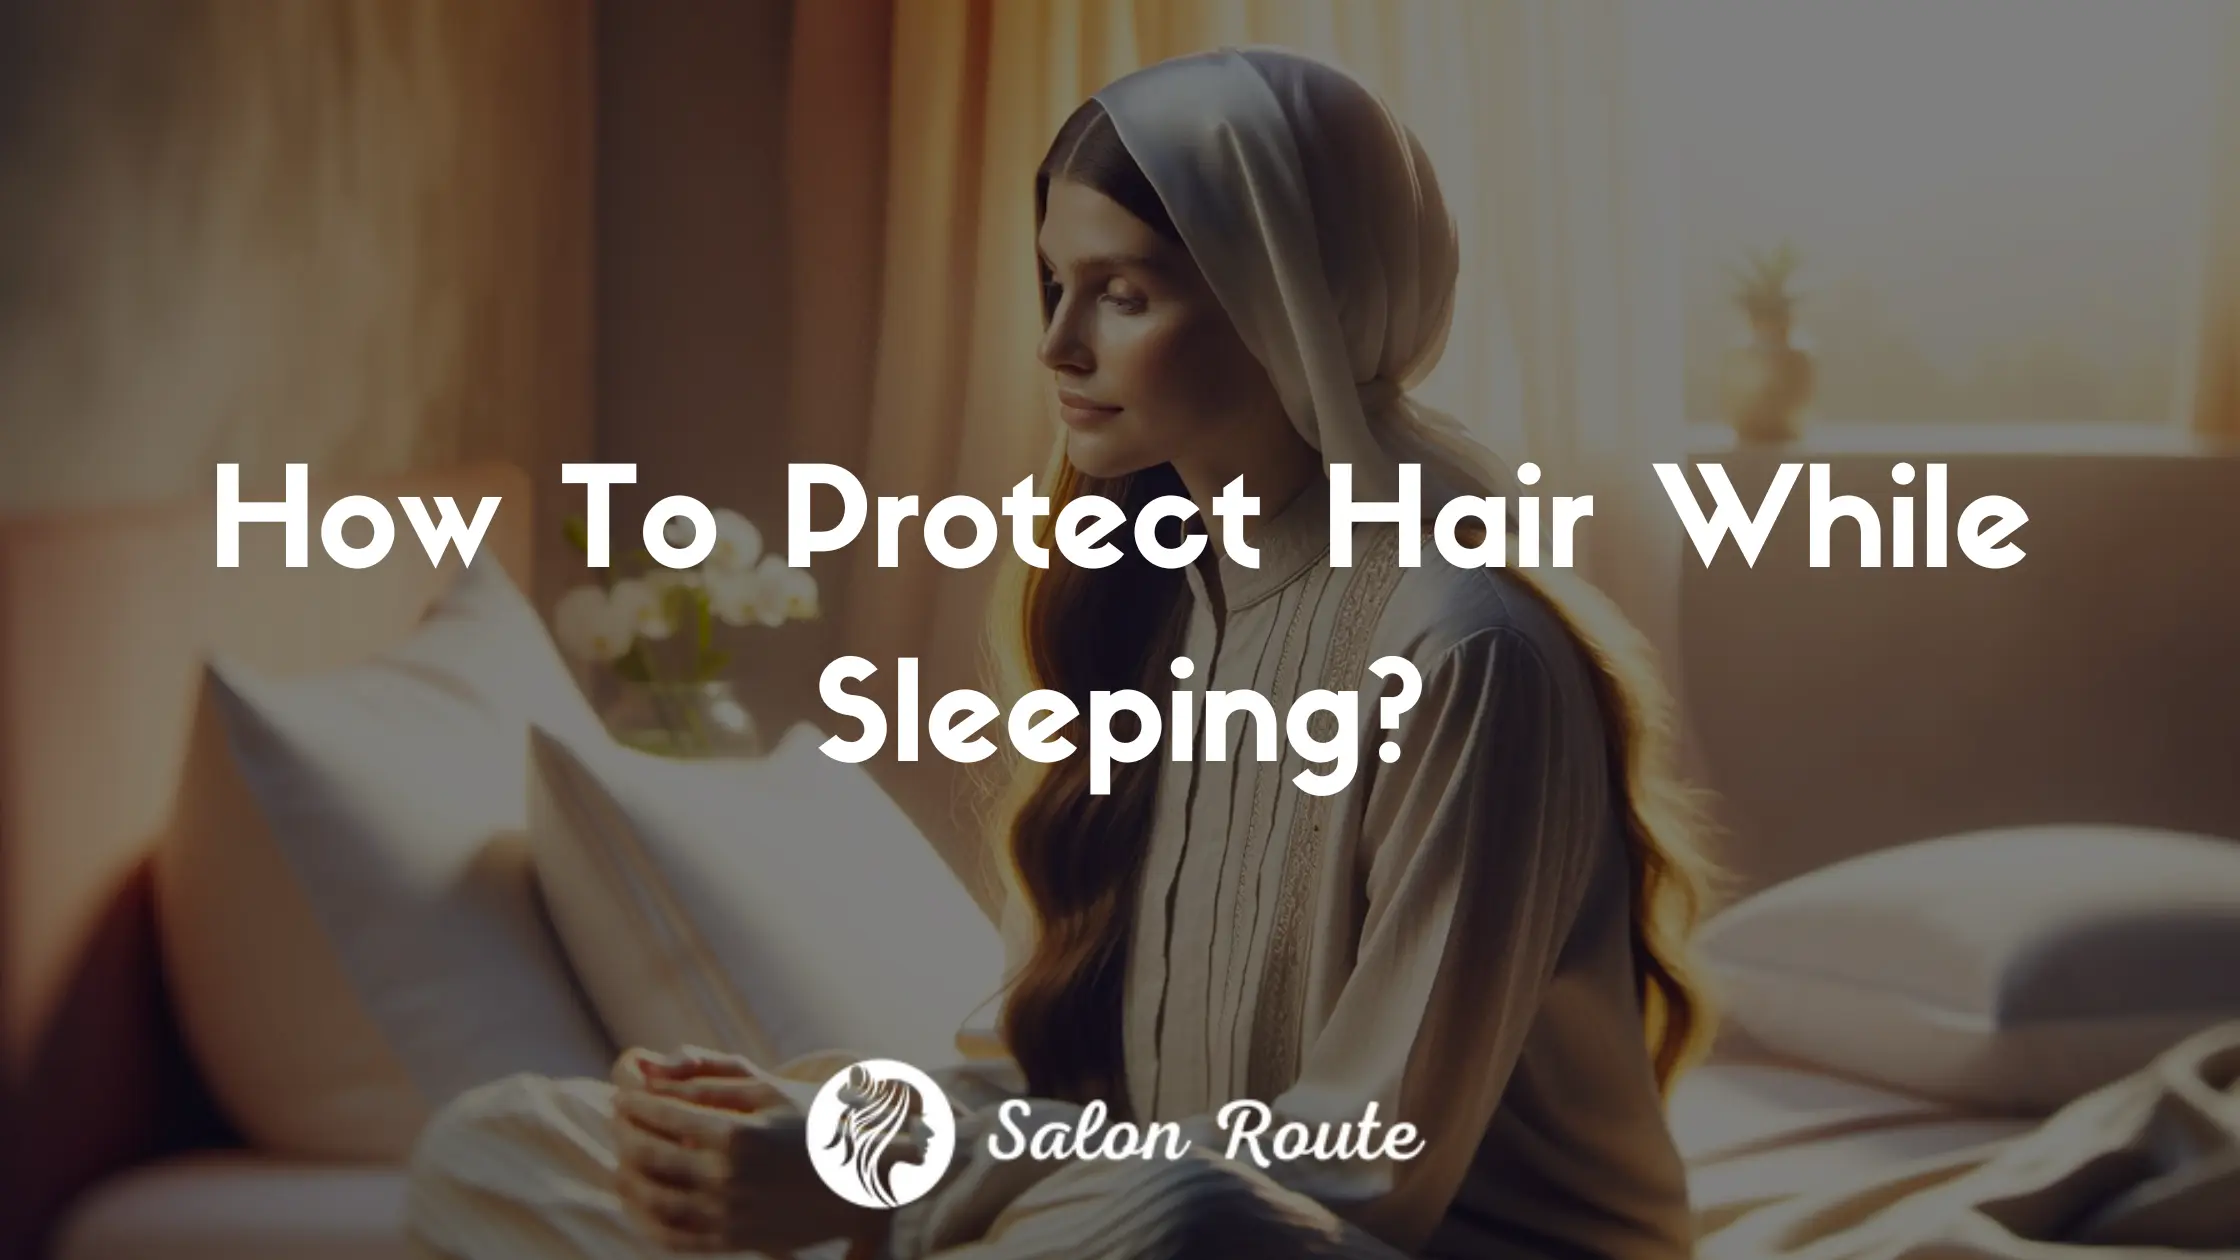 How To Protect Hair While Sleeping?